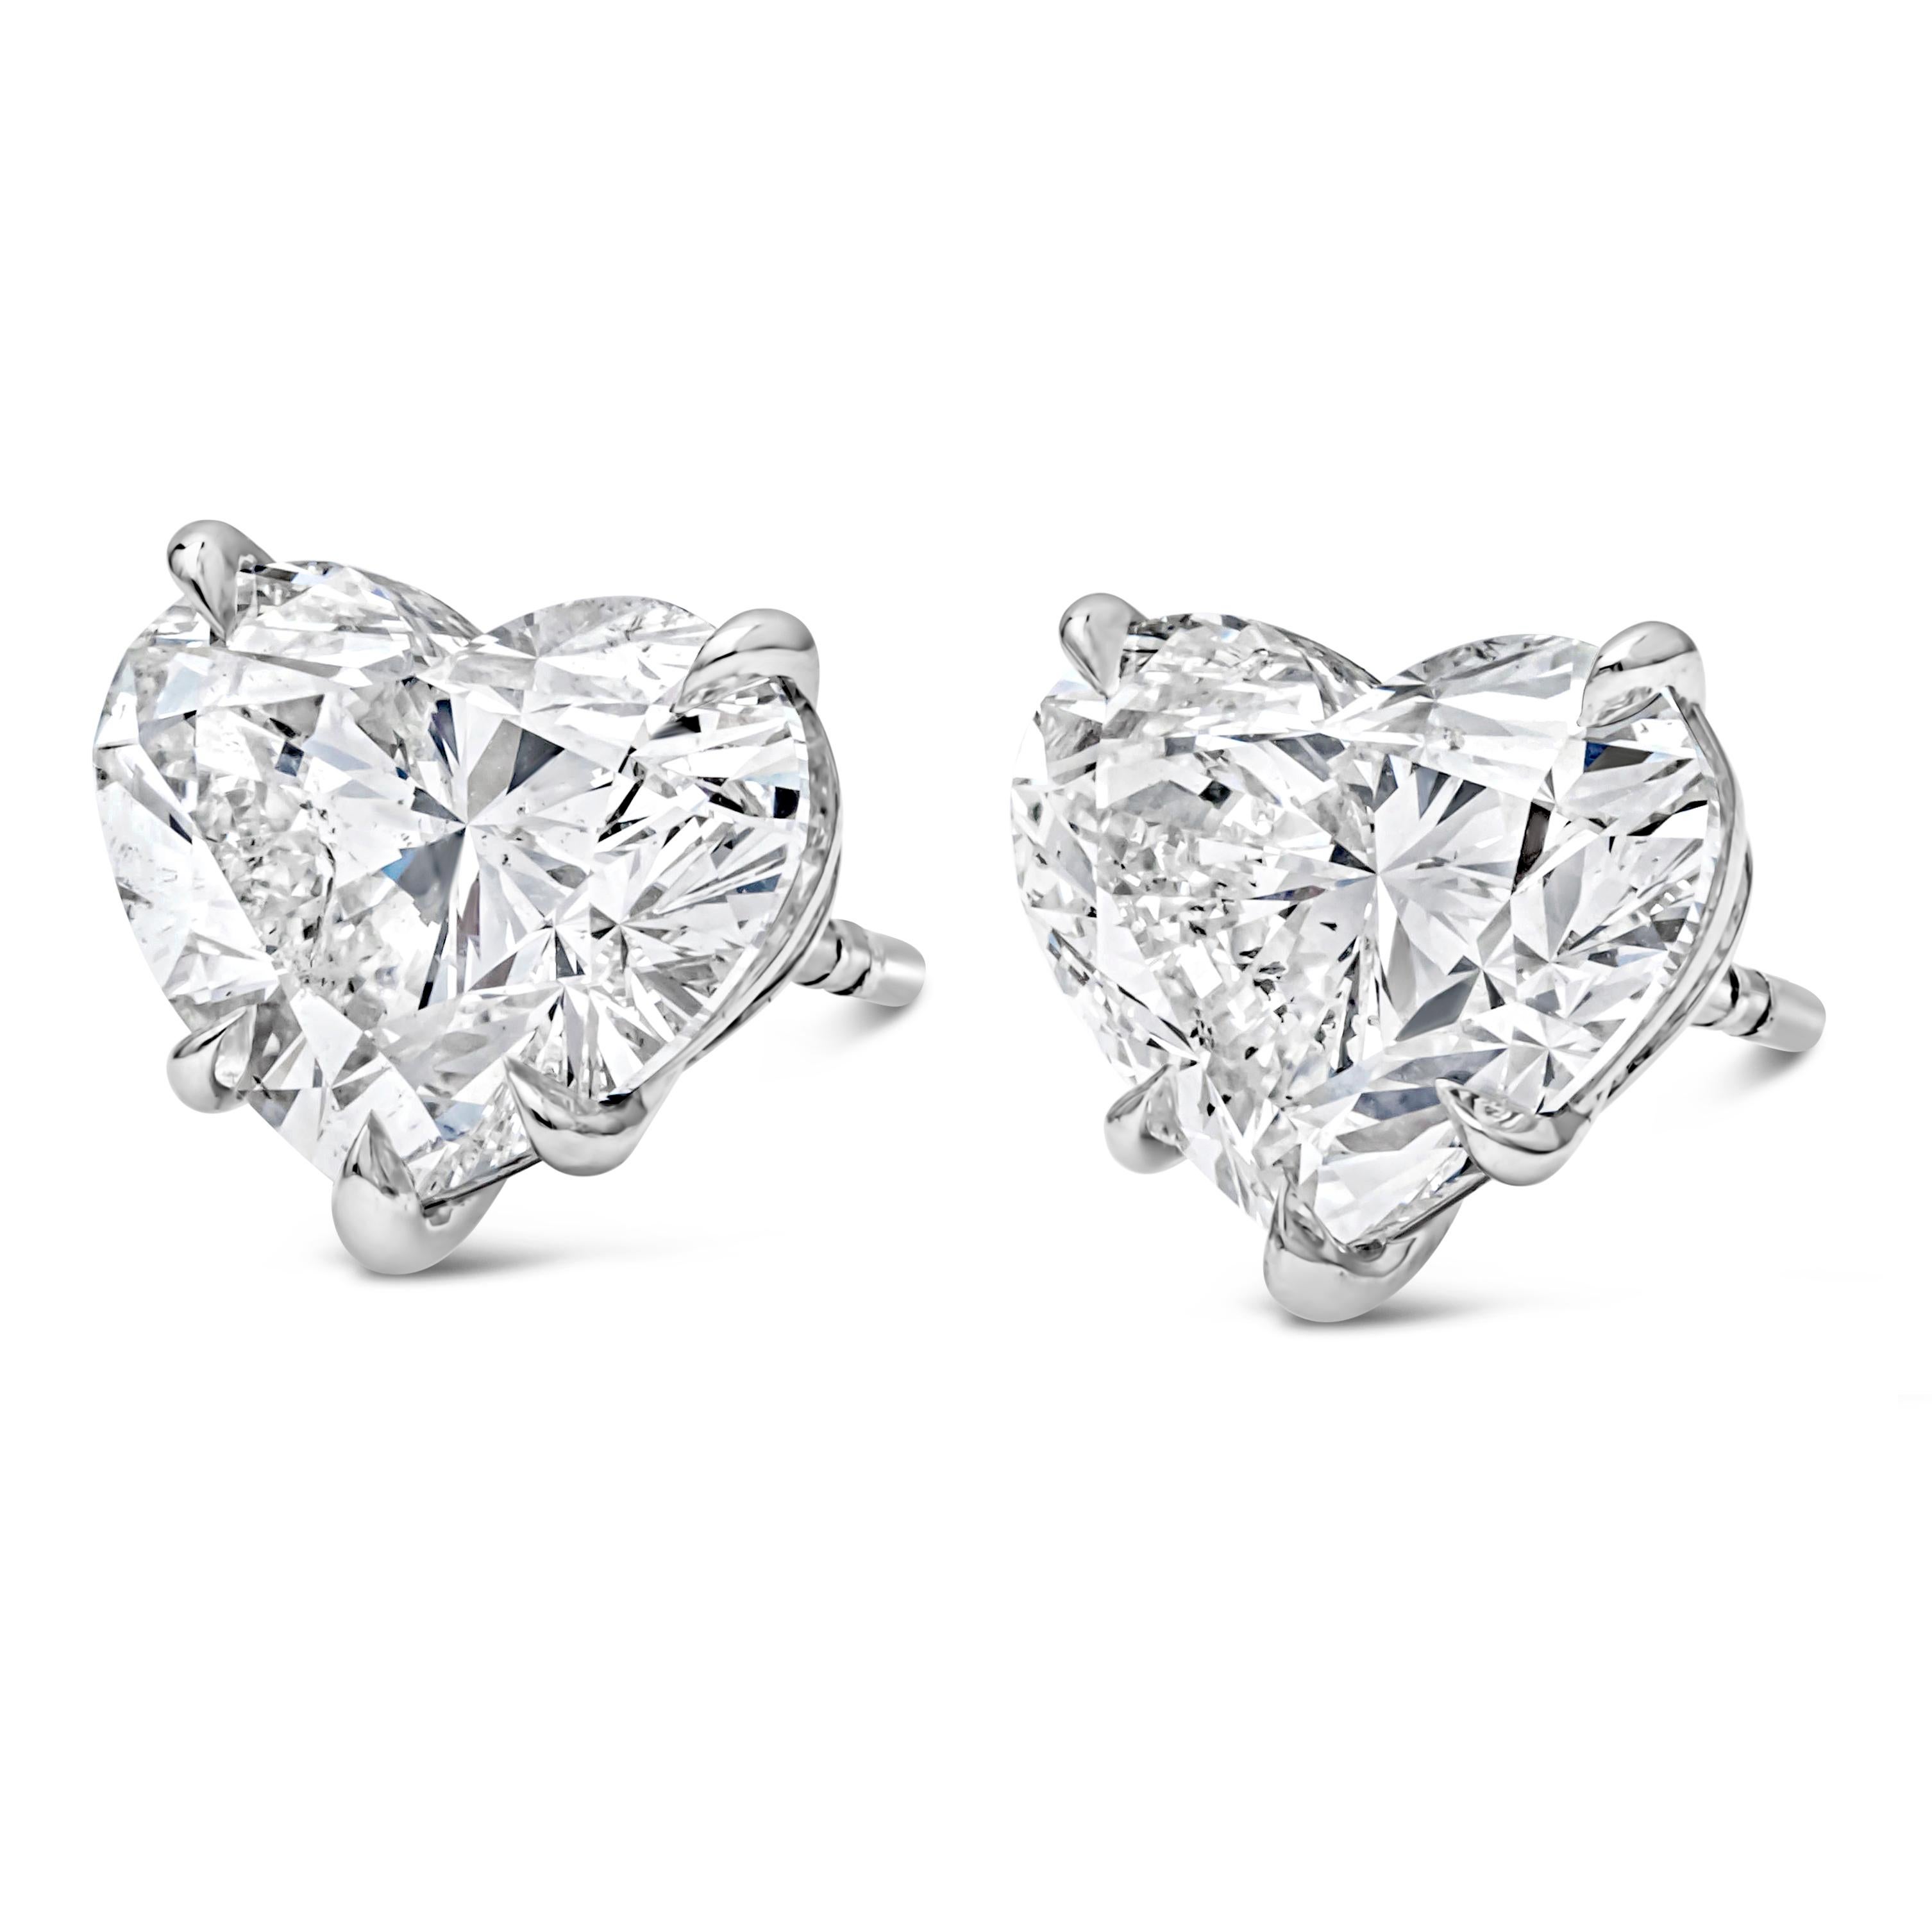 Classic pair of stud earrings, showcasing two GIA certified brilliant heart shape diamonds, weighing 3.01 carats and 3.02 carats with H-I color and SI2 clarity, respectively. Mounted on a timeless five-prong basket setting finely made of